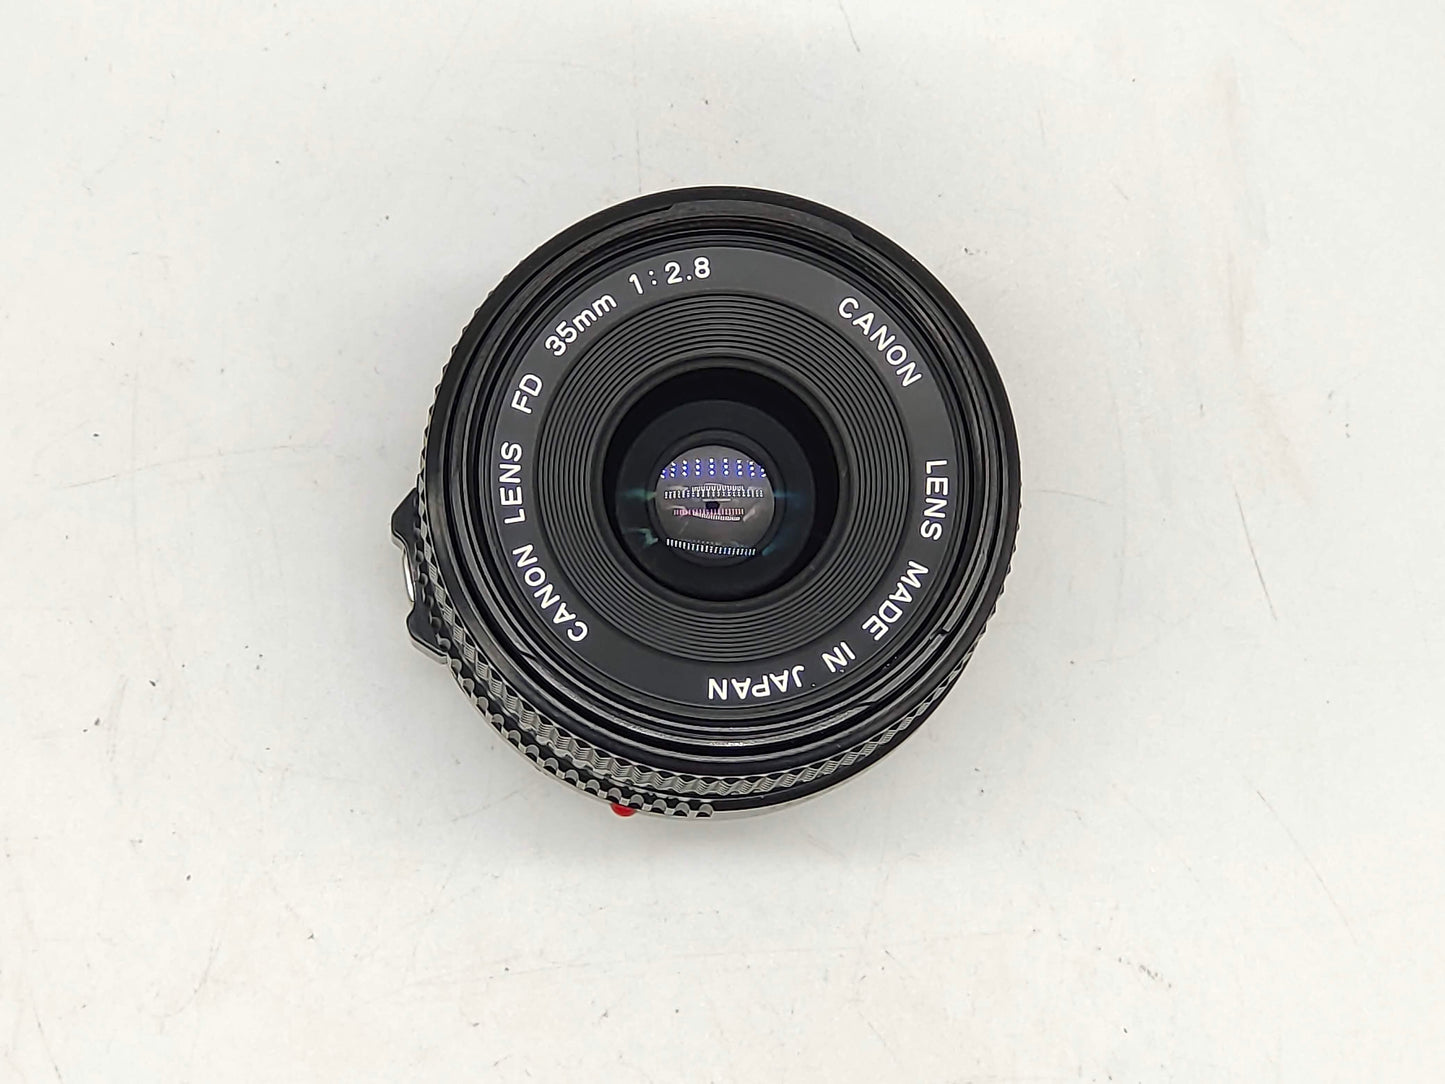 Canon 35mm f/2.8 New FD wide-angle lens